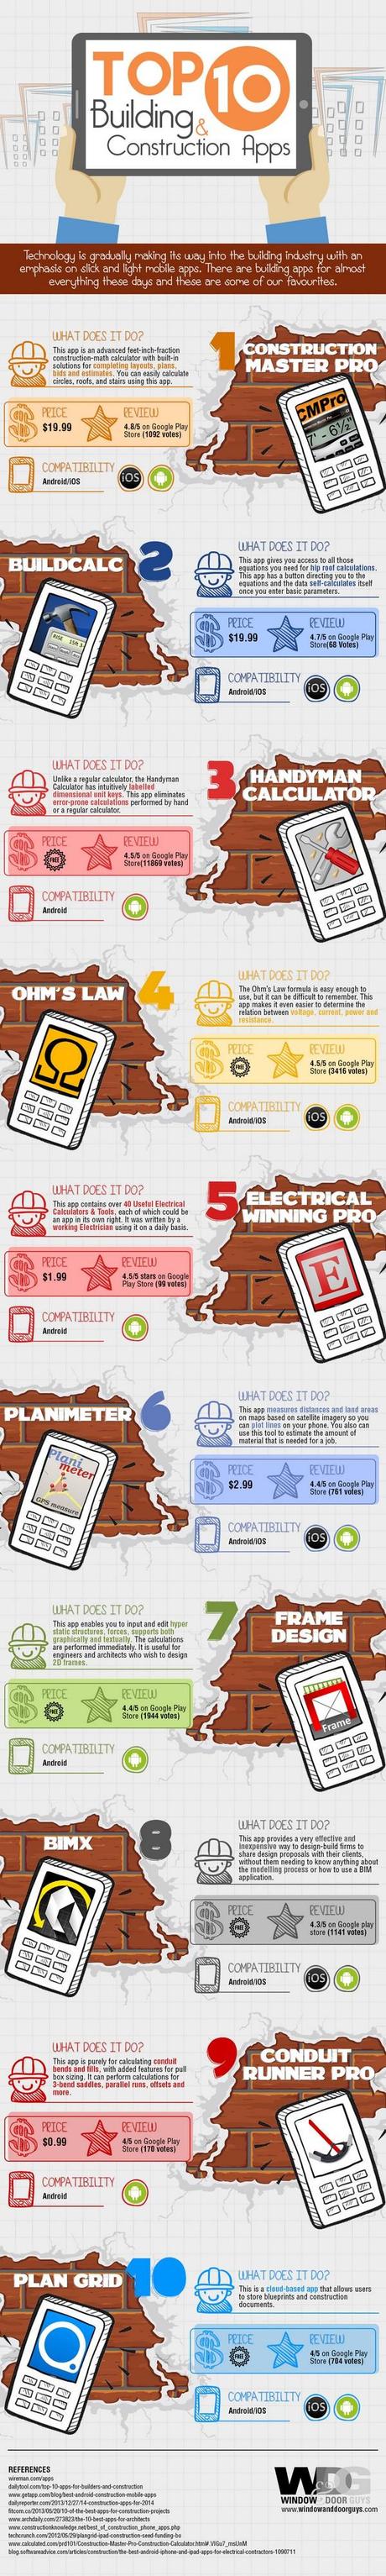 apps-constructions-infographic